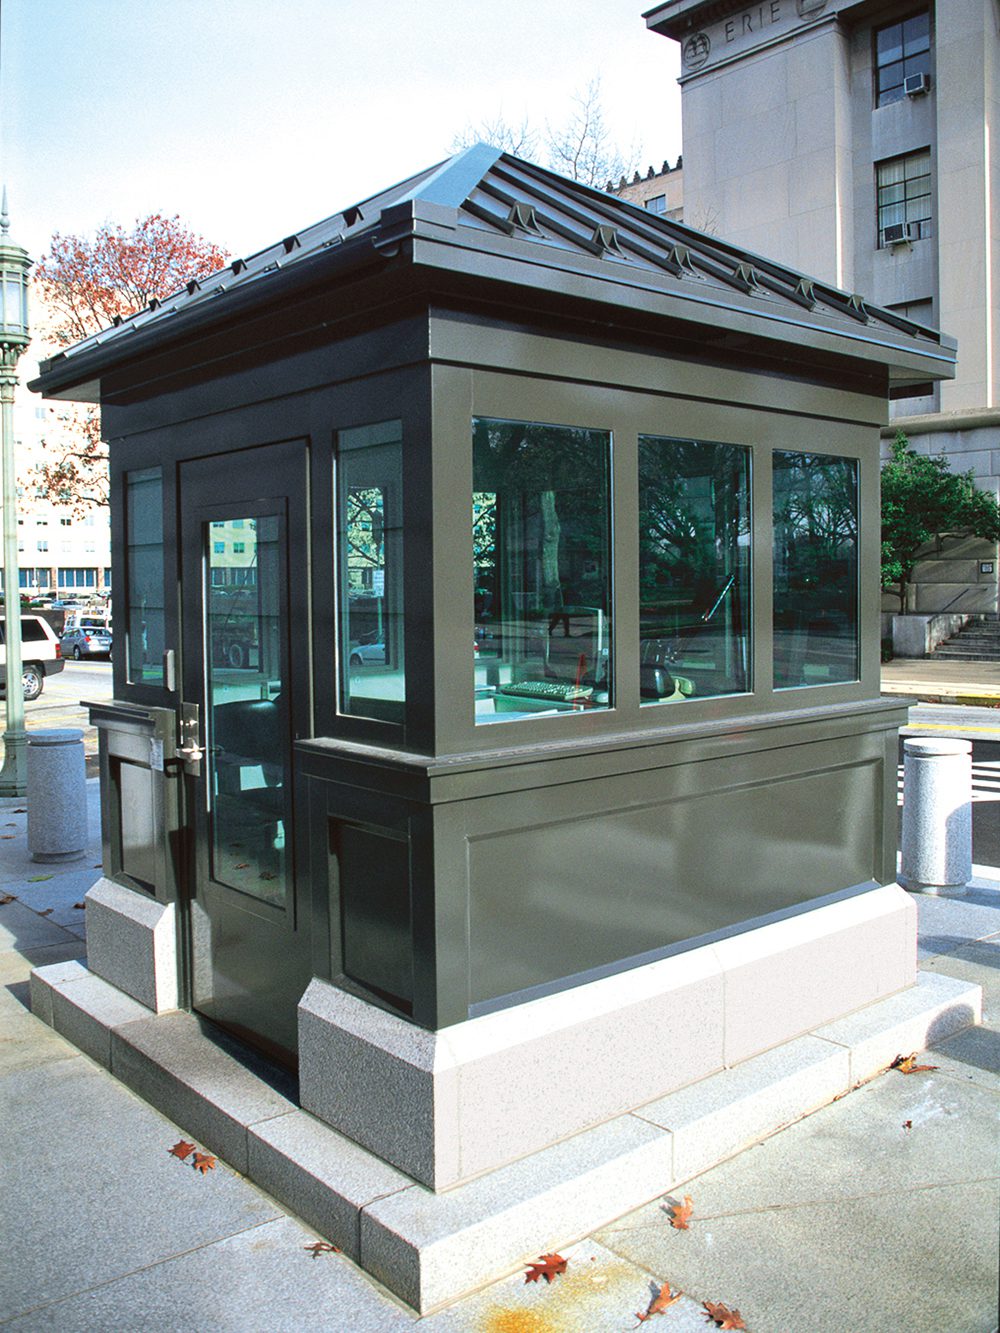 Security for a new era: innovative guard booth